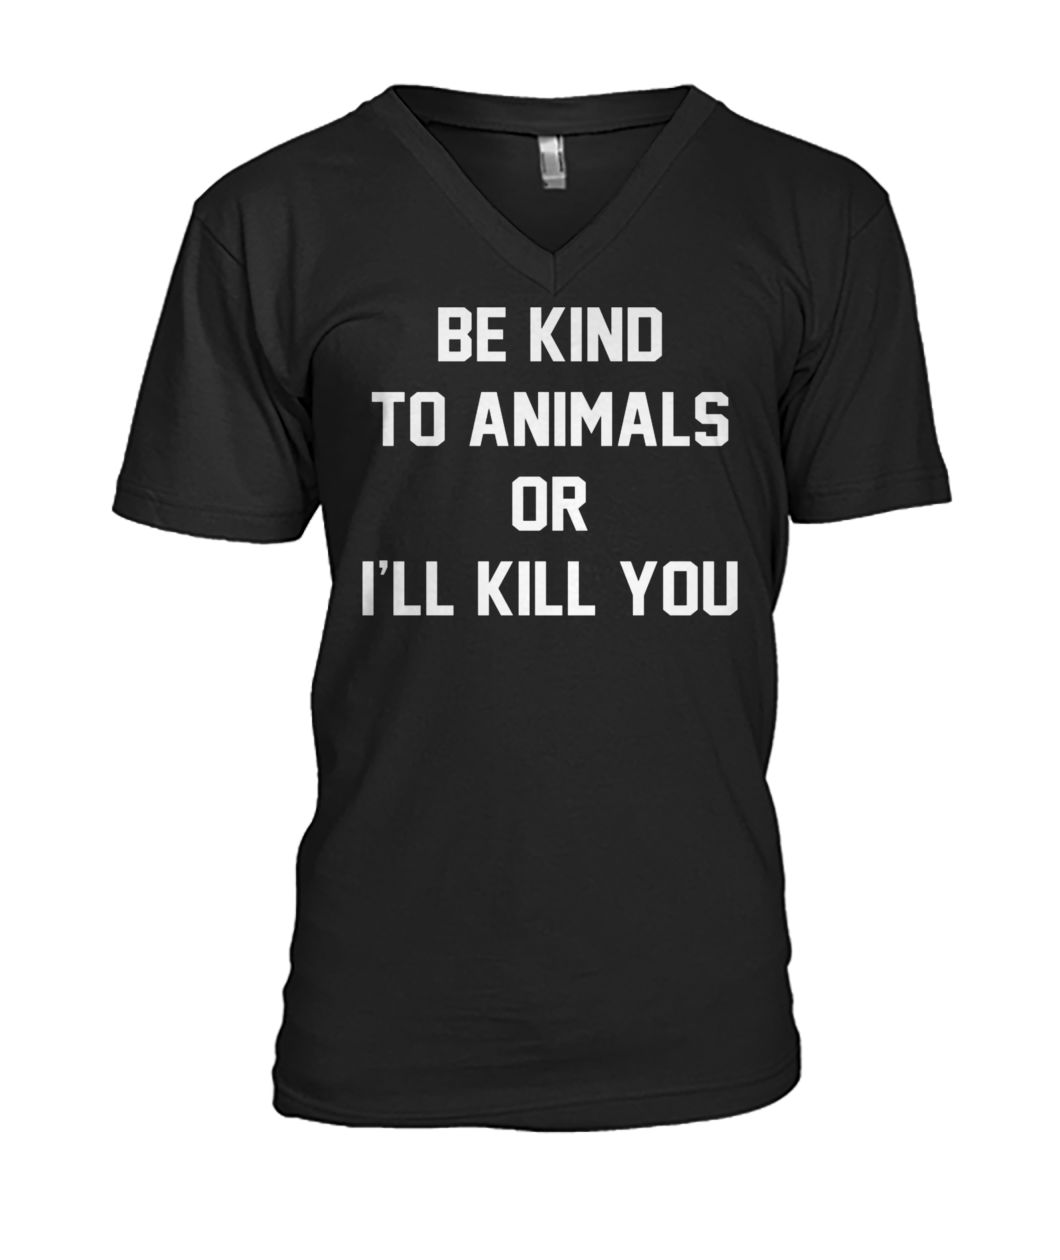 Animal rights be kind to animals or I'll kill you mens v-neck